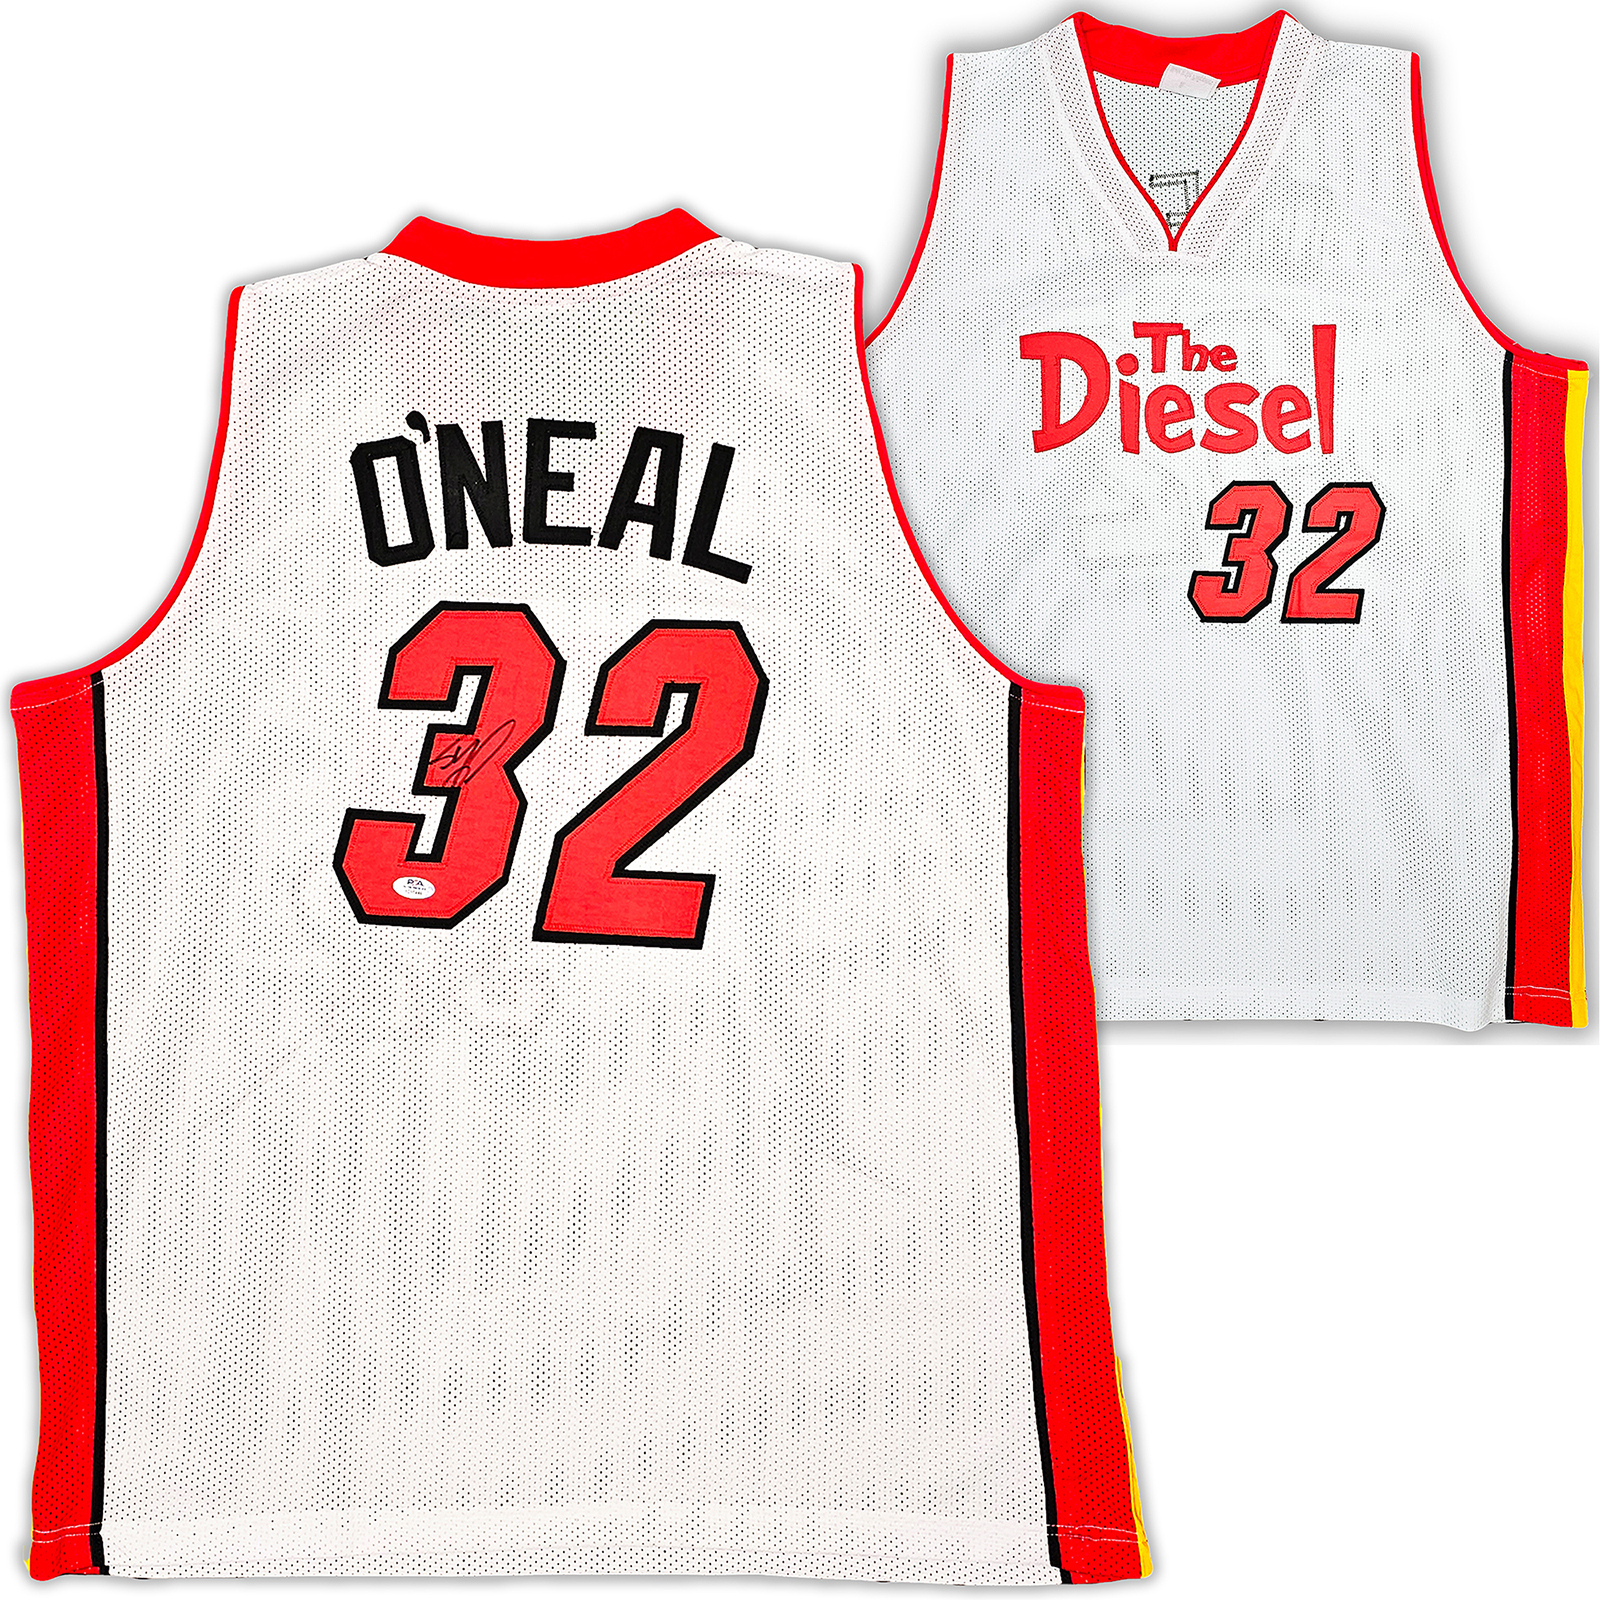 Shaq Jersey, Shaquille O'Neal Jerseys, T-Shirts and Shaq Hall of